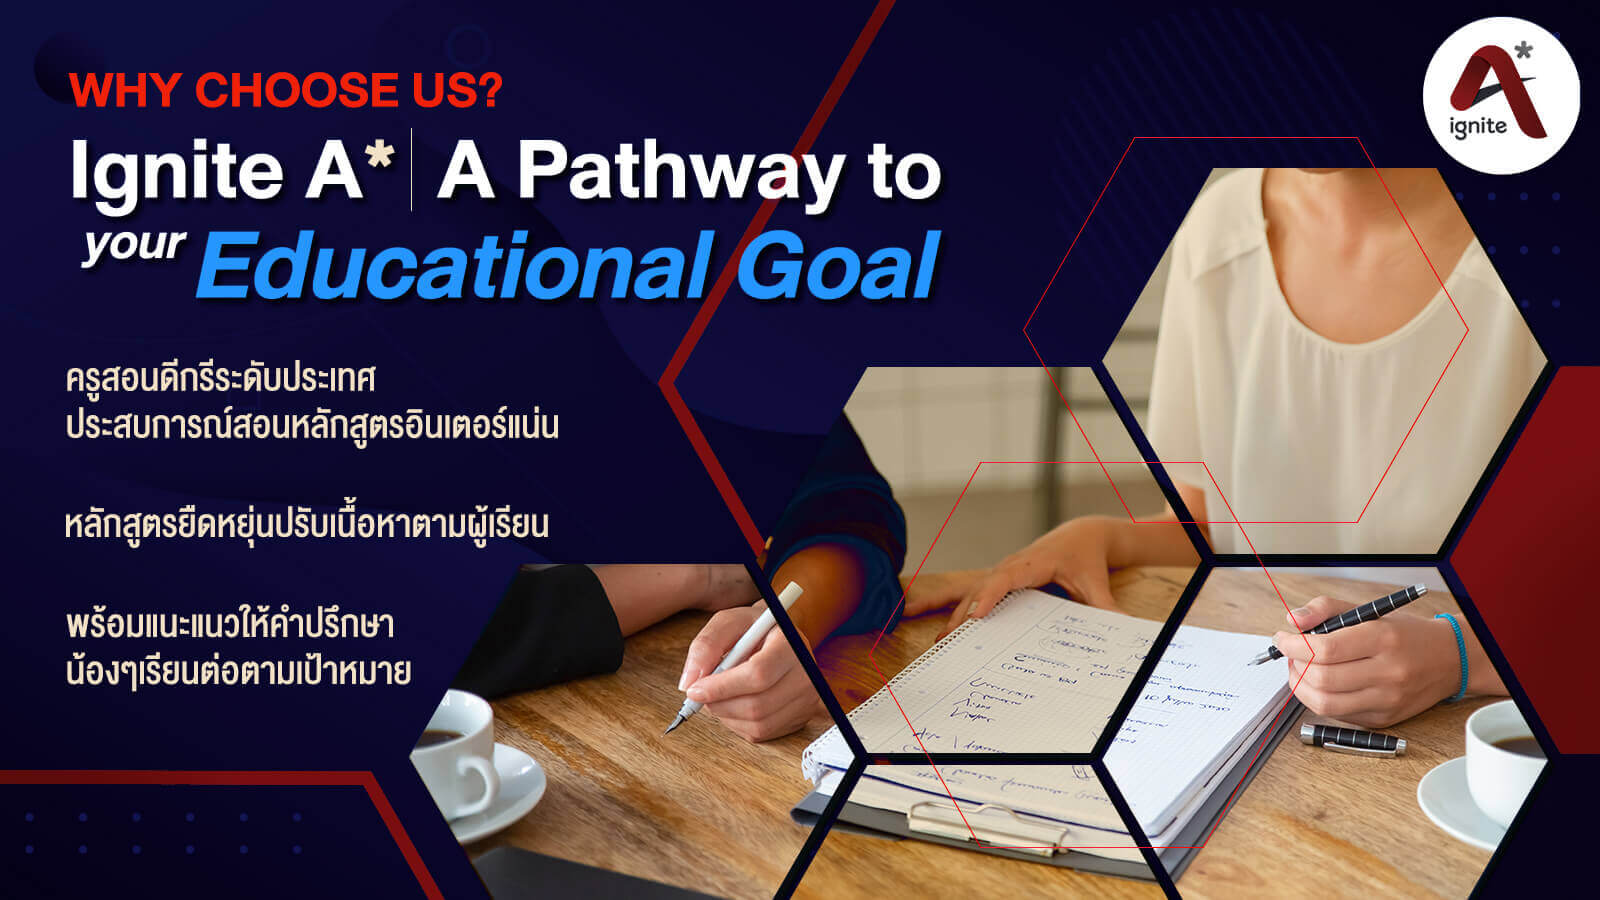 Ignite a star a pathway to your educational goal